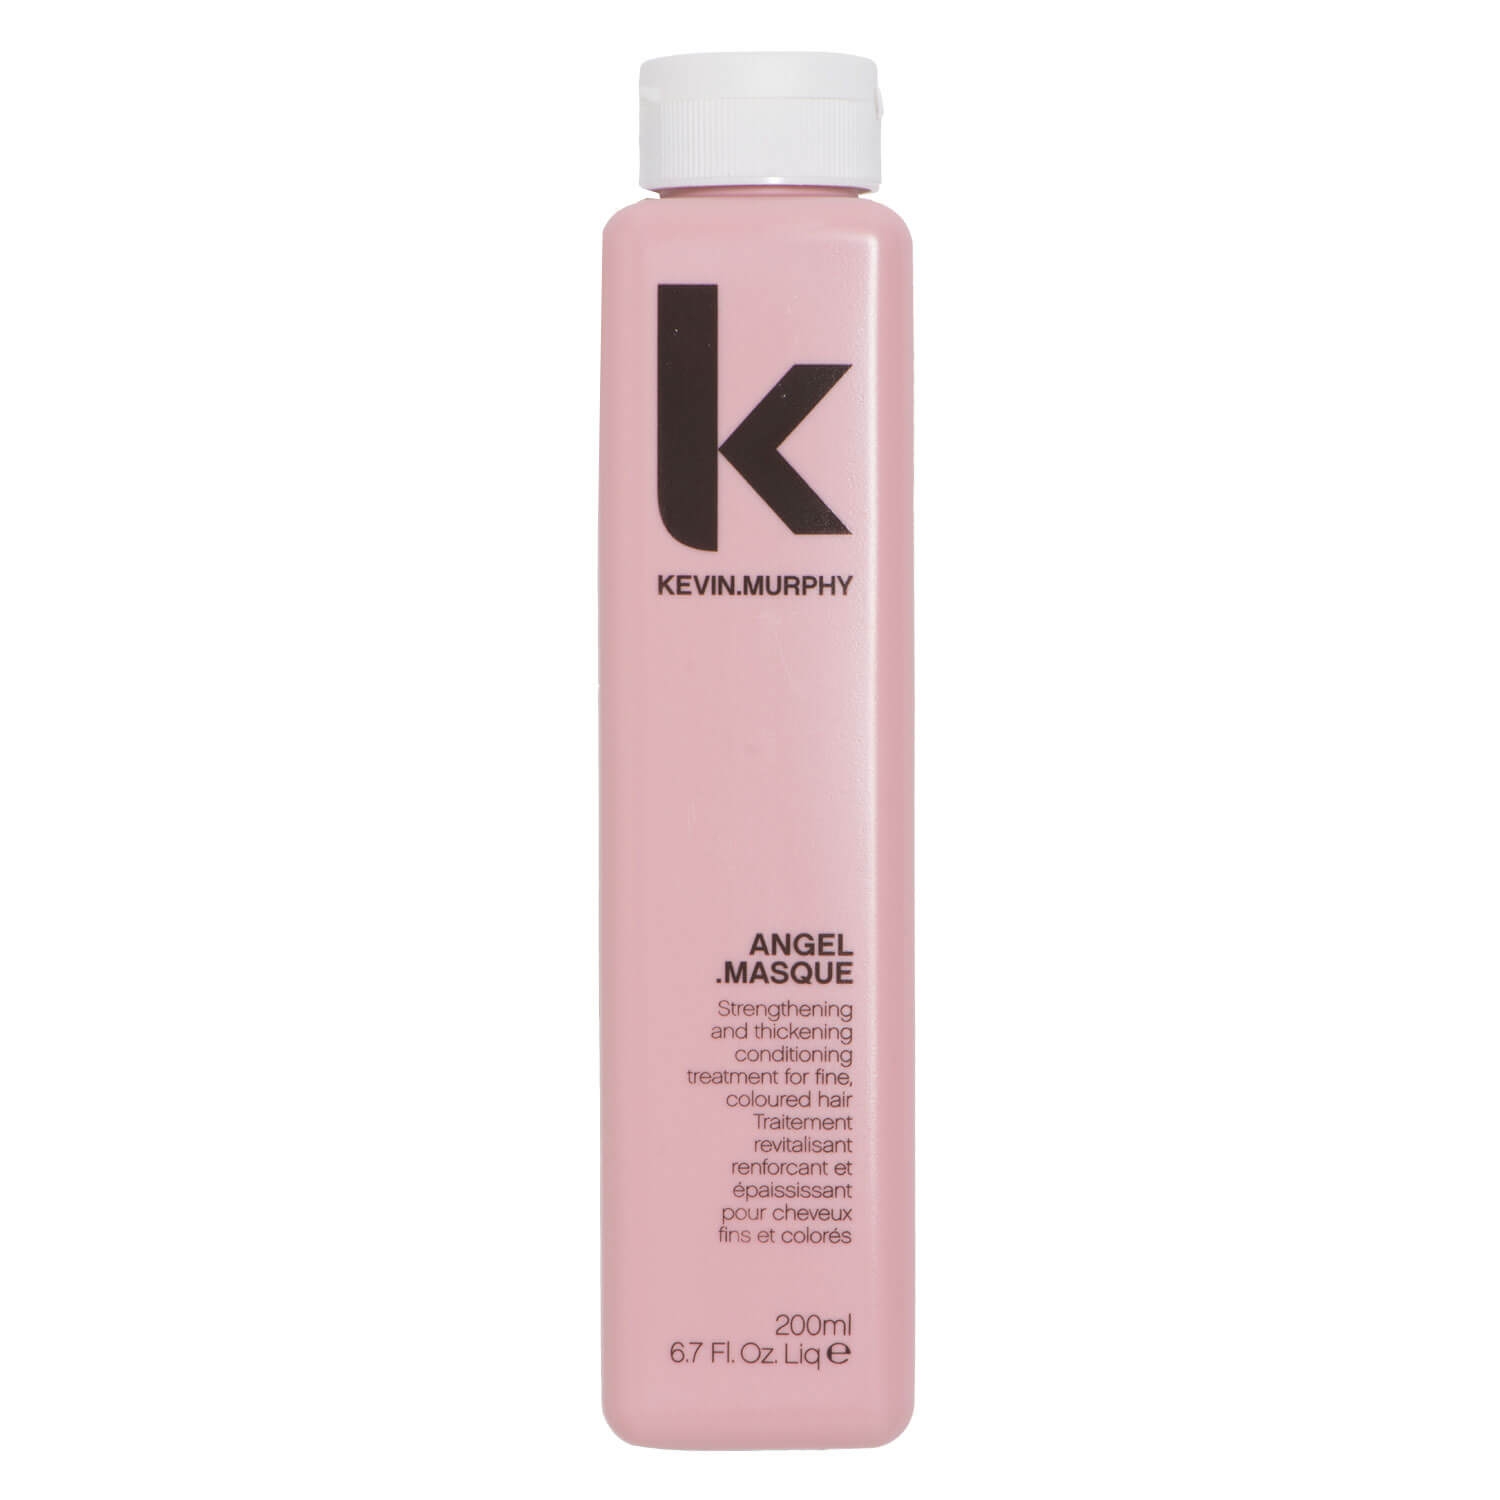 Product image from KM Angel - Angel.Masque